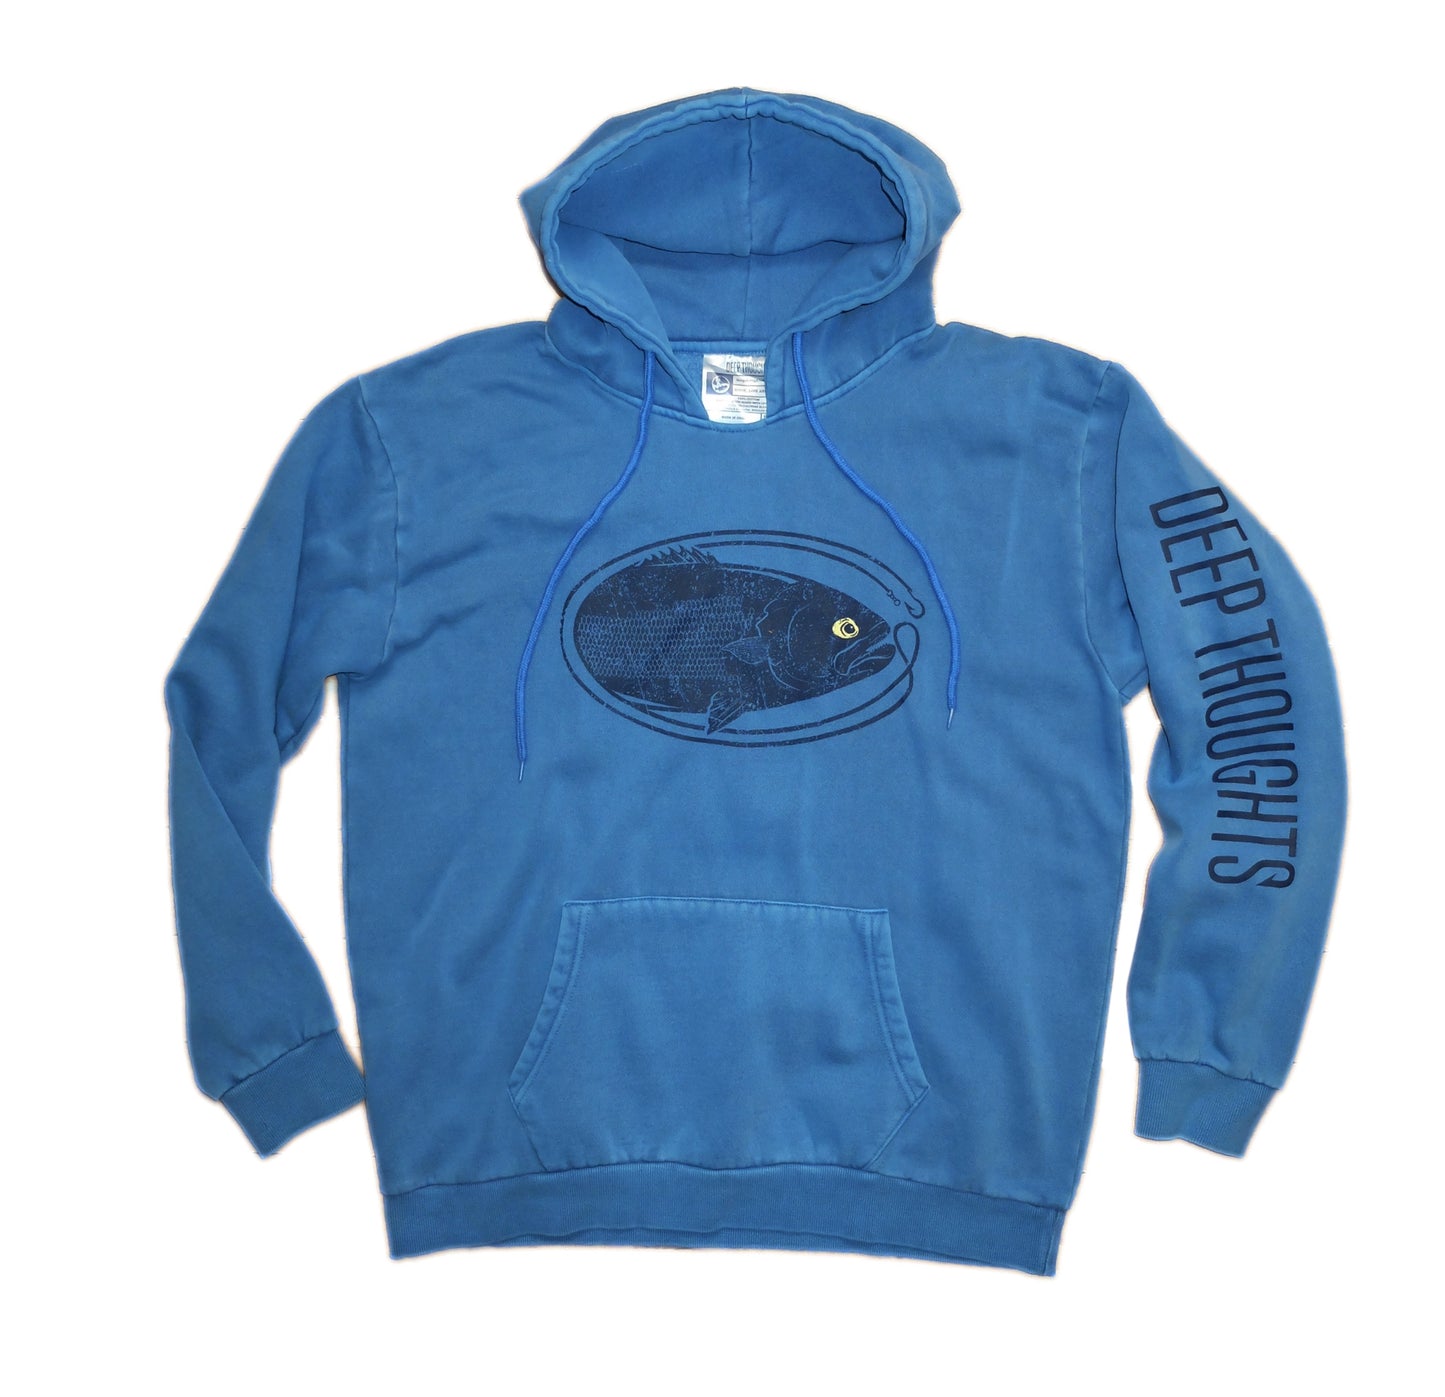 washed blue hoodie with dark blue oval-shaped vintage style bluefish graphic and 'Deep Thoughts' sleeve print